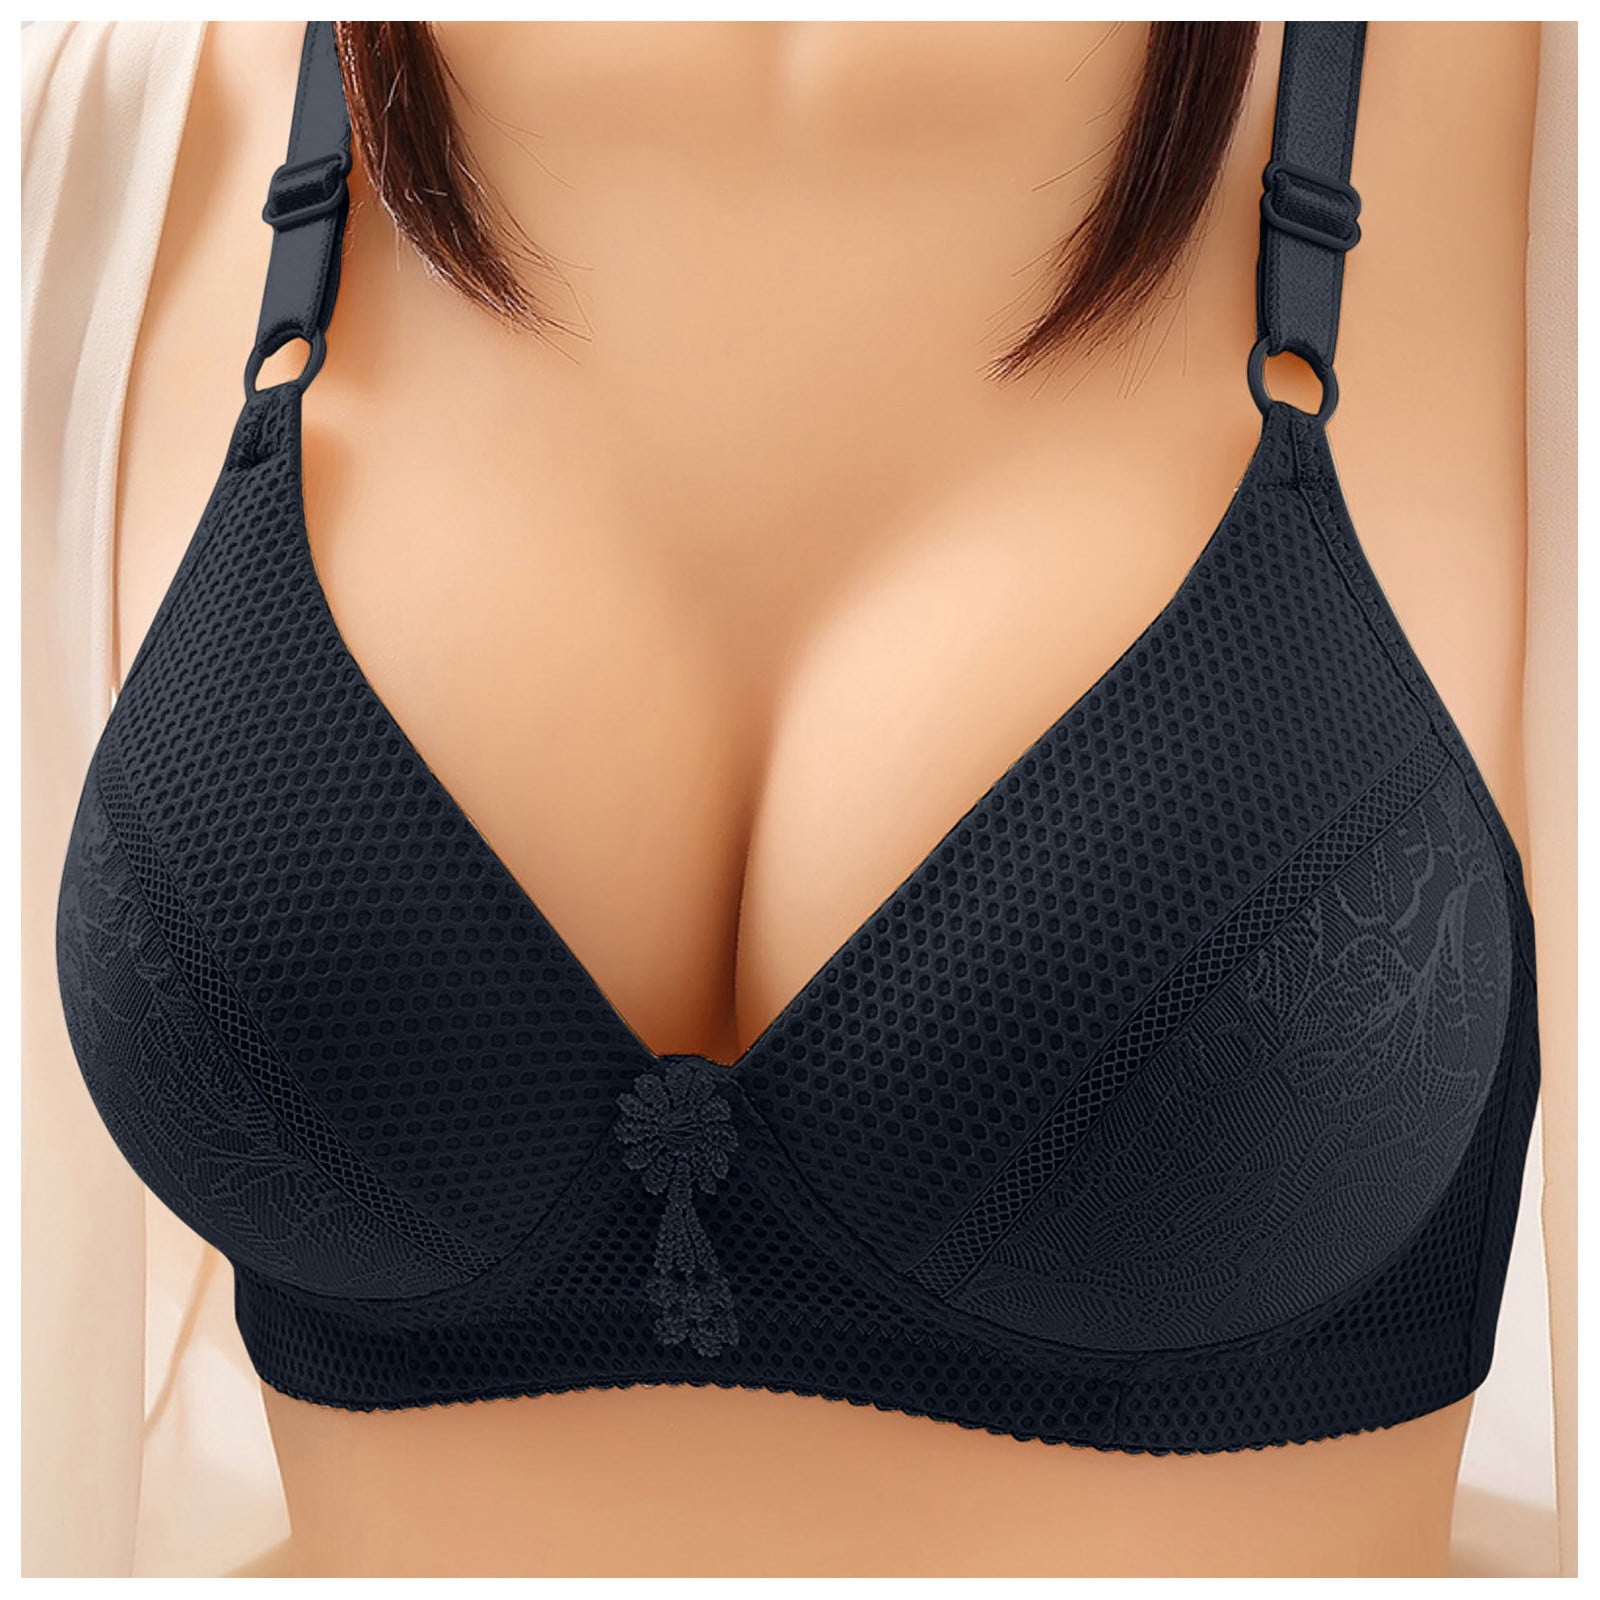 Strapless Bras for Women Ladies Top Beauty Ladies Set Shapermint Bra for  Womens Wirefree Black E